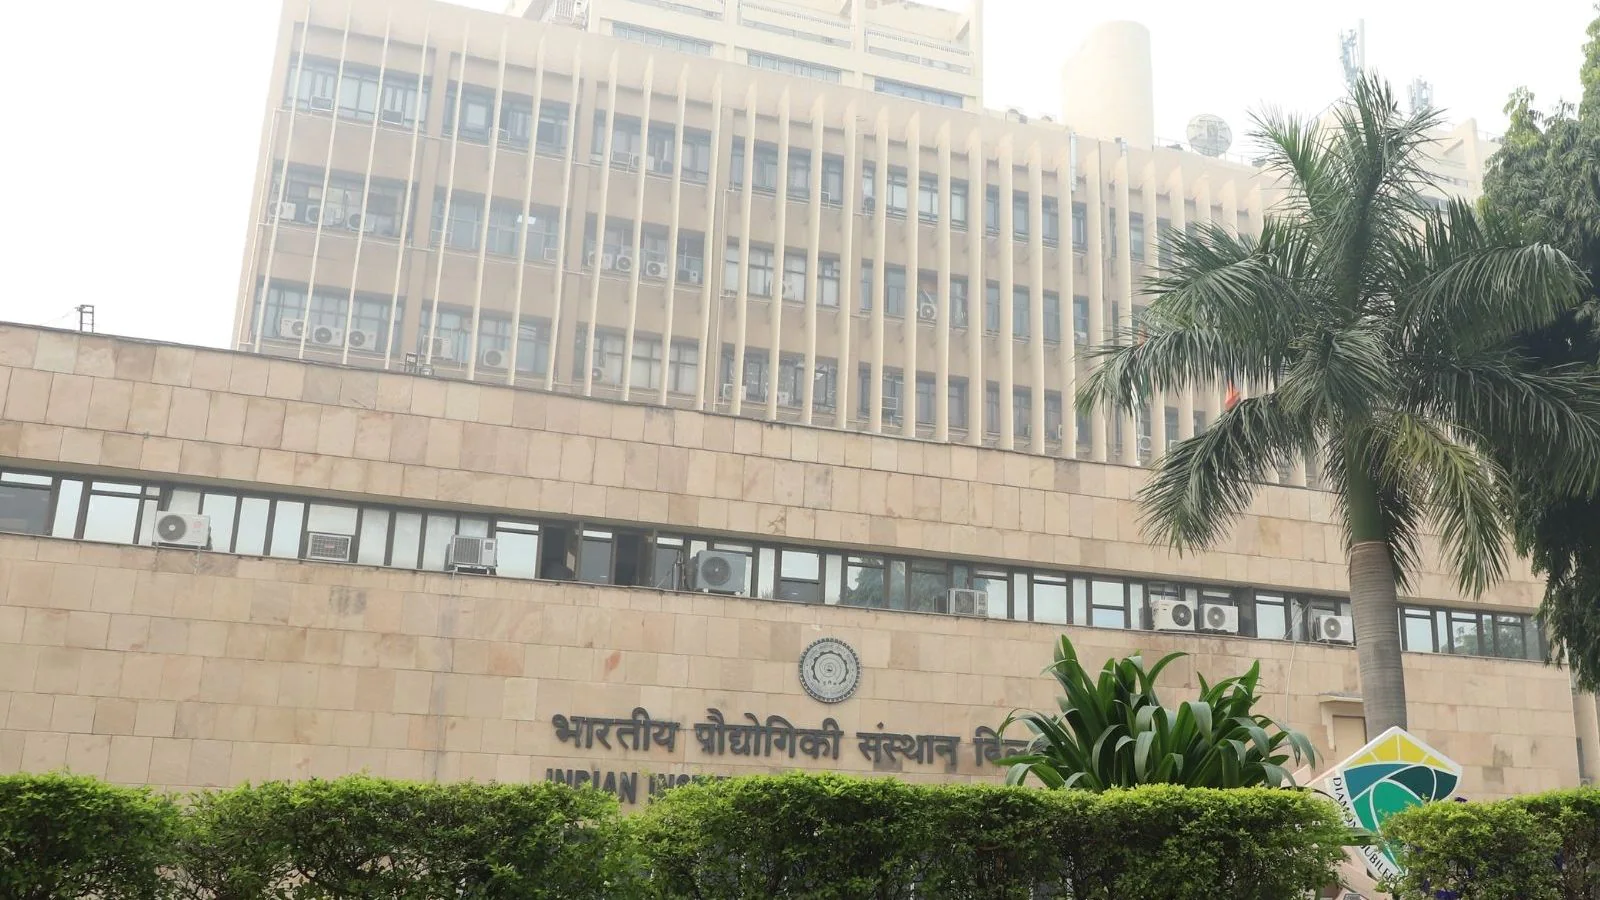 IIT Delhi to Set-up Office of Diversity and Inclusion, Creates New Dean Position